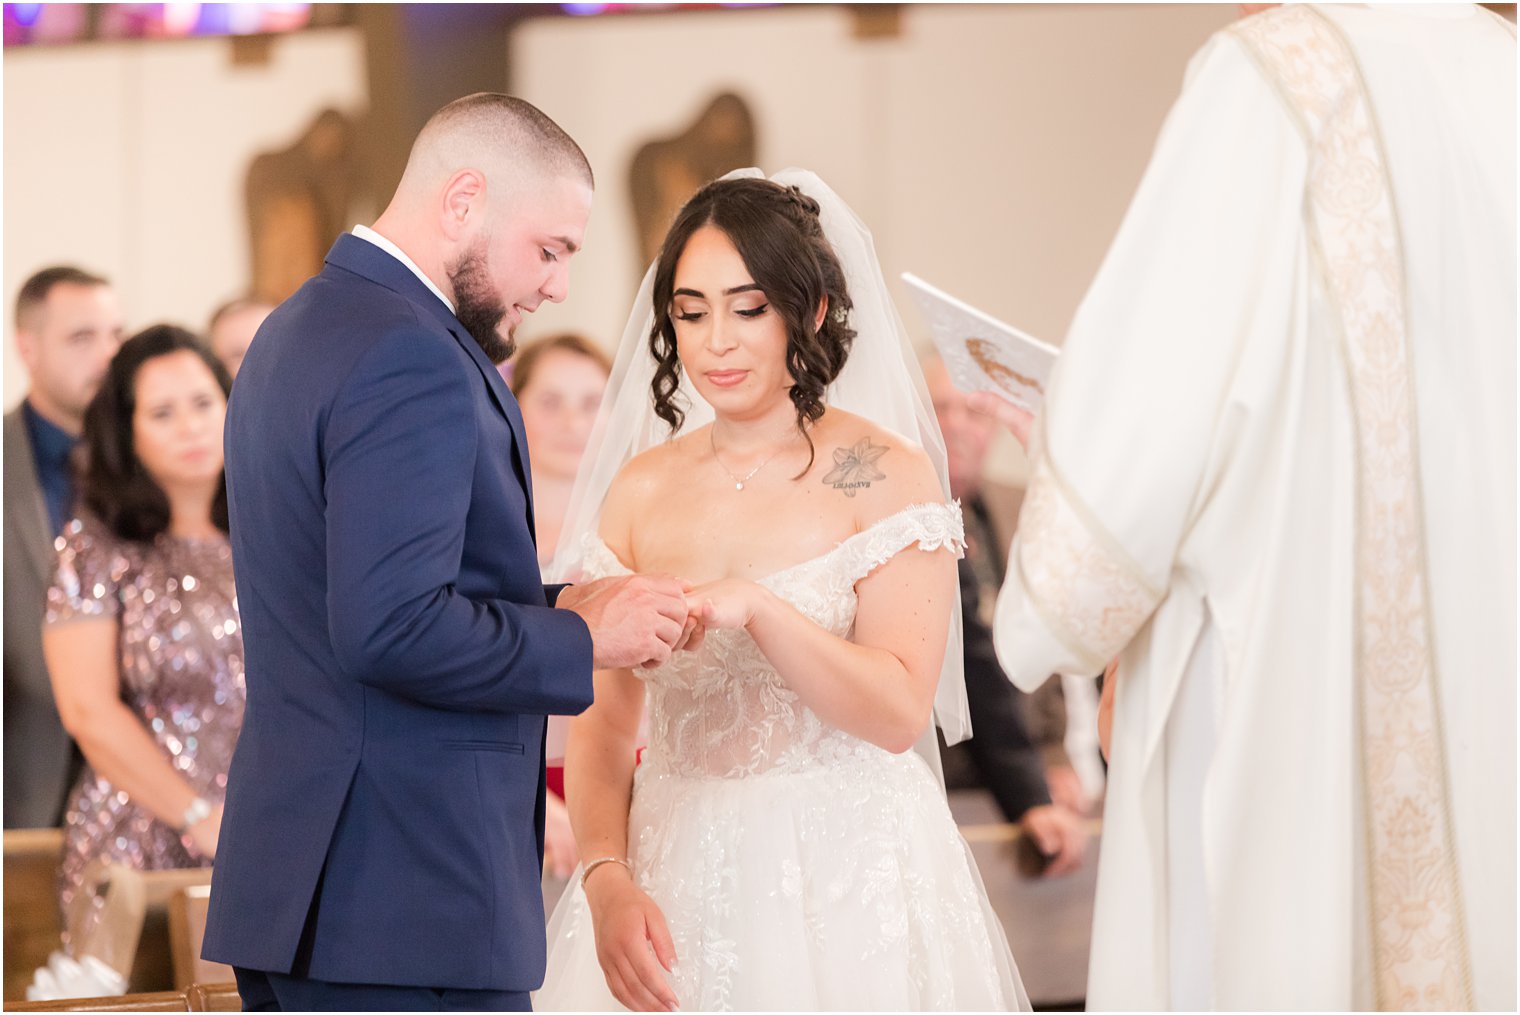 newlyweds exchange rings during traditional wedding ceremony at Saint Matthew the Apostle church